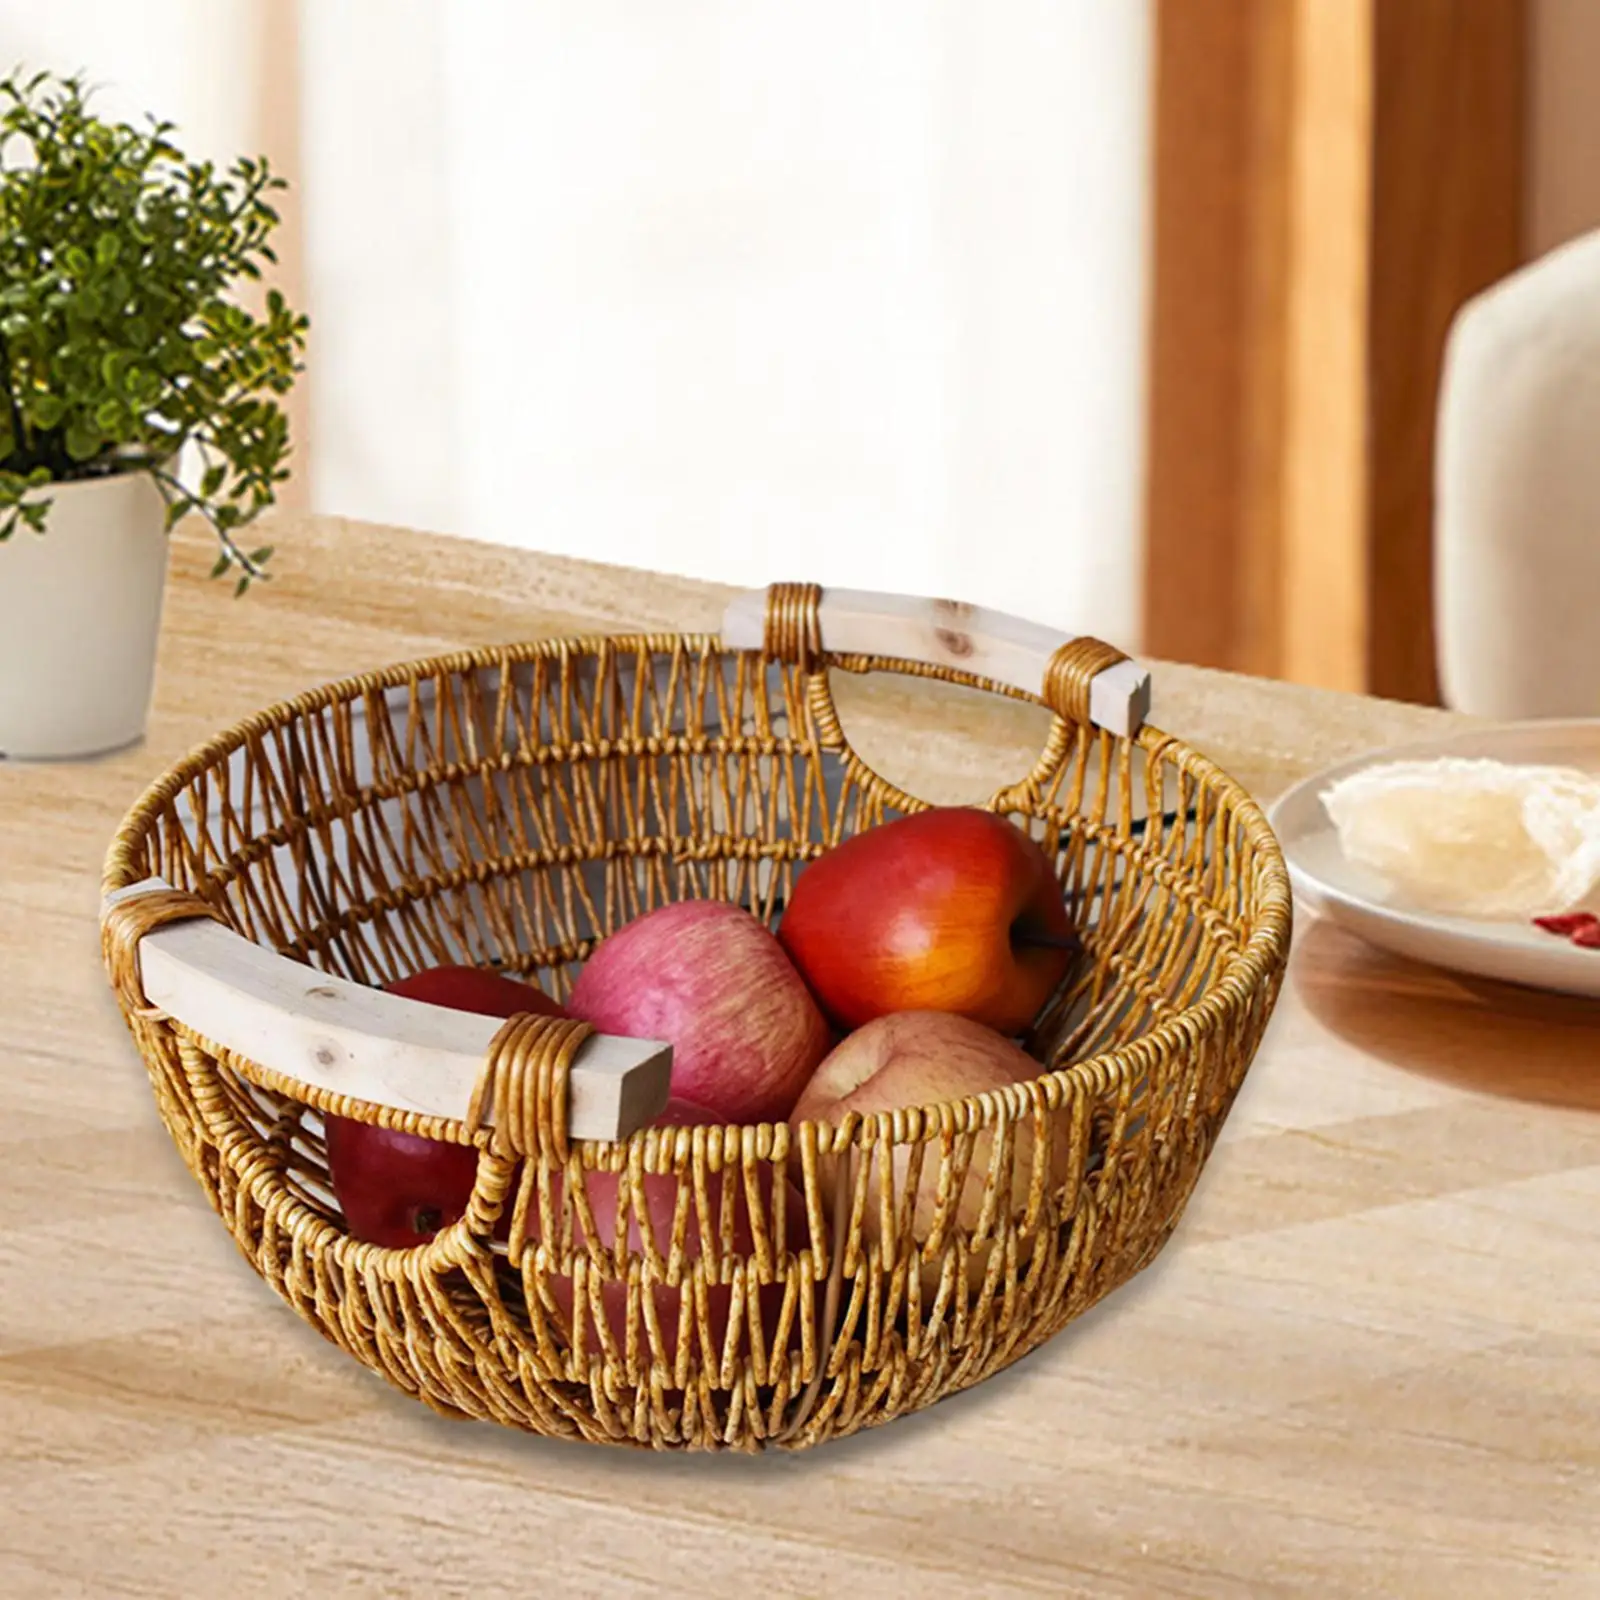 Fruit Basket with Double Handles Sturdy Photography Props Camping Basket Woven Body Picnic Basket Picking Basket Outdoor Basket